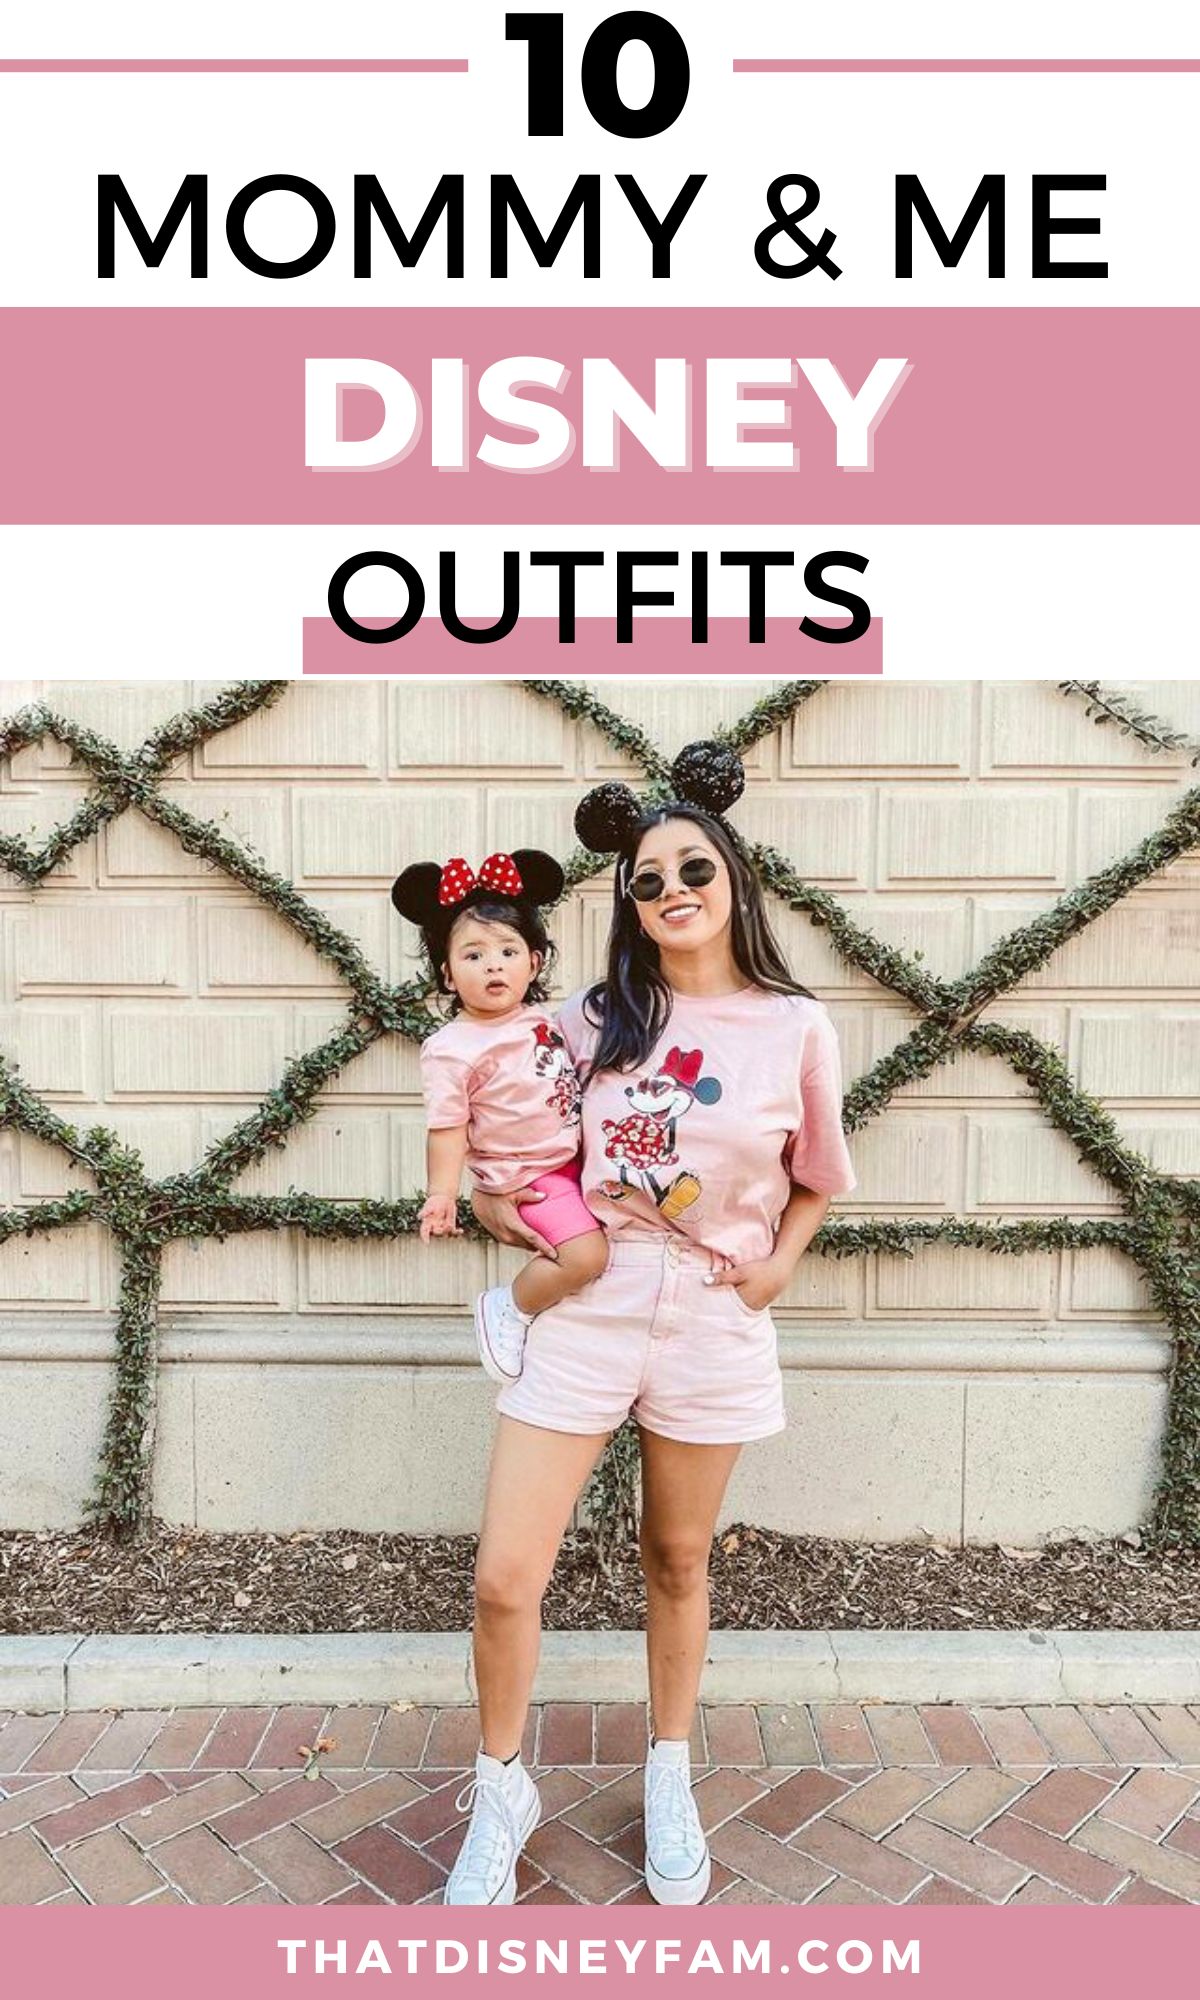 mommy and me disney outfits